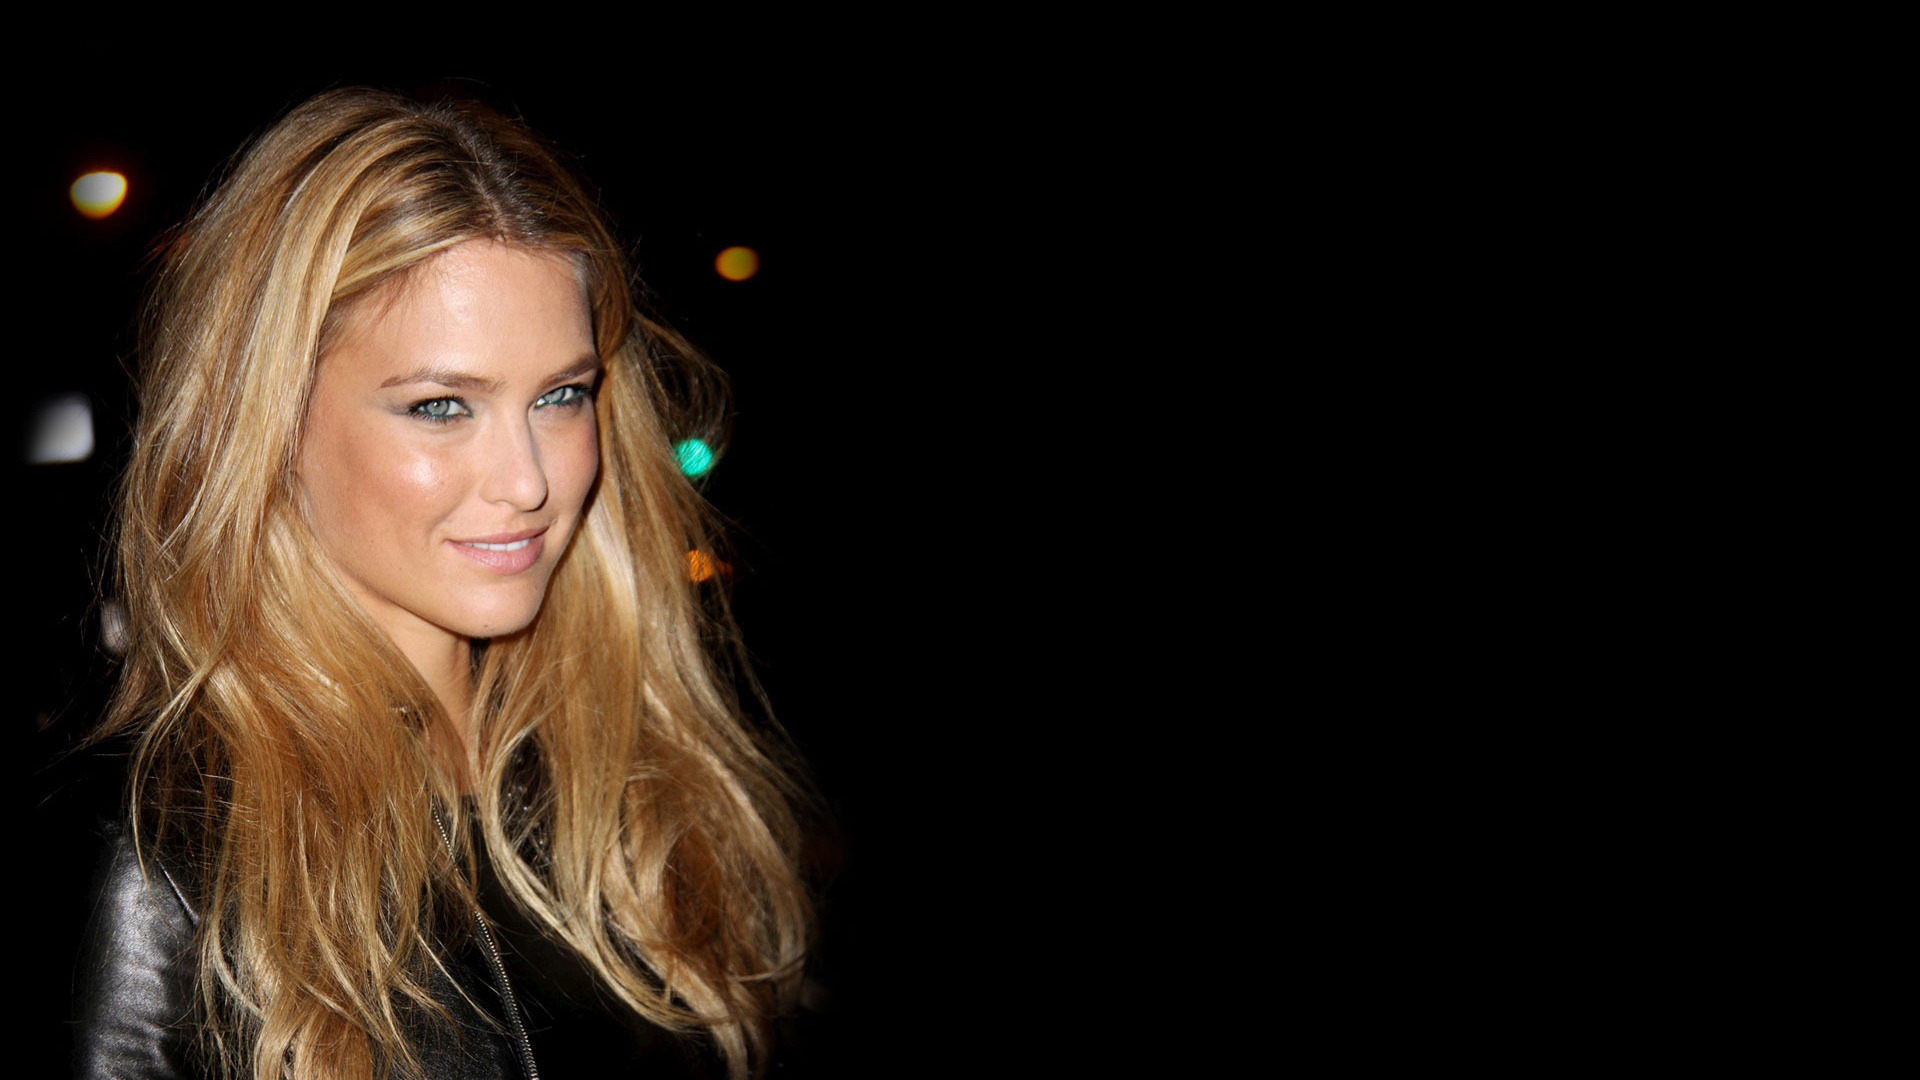  on November 5 2015 By Stephen Comments Off on Bar Refaeli Wallpapers